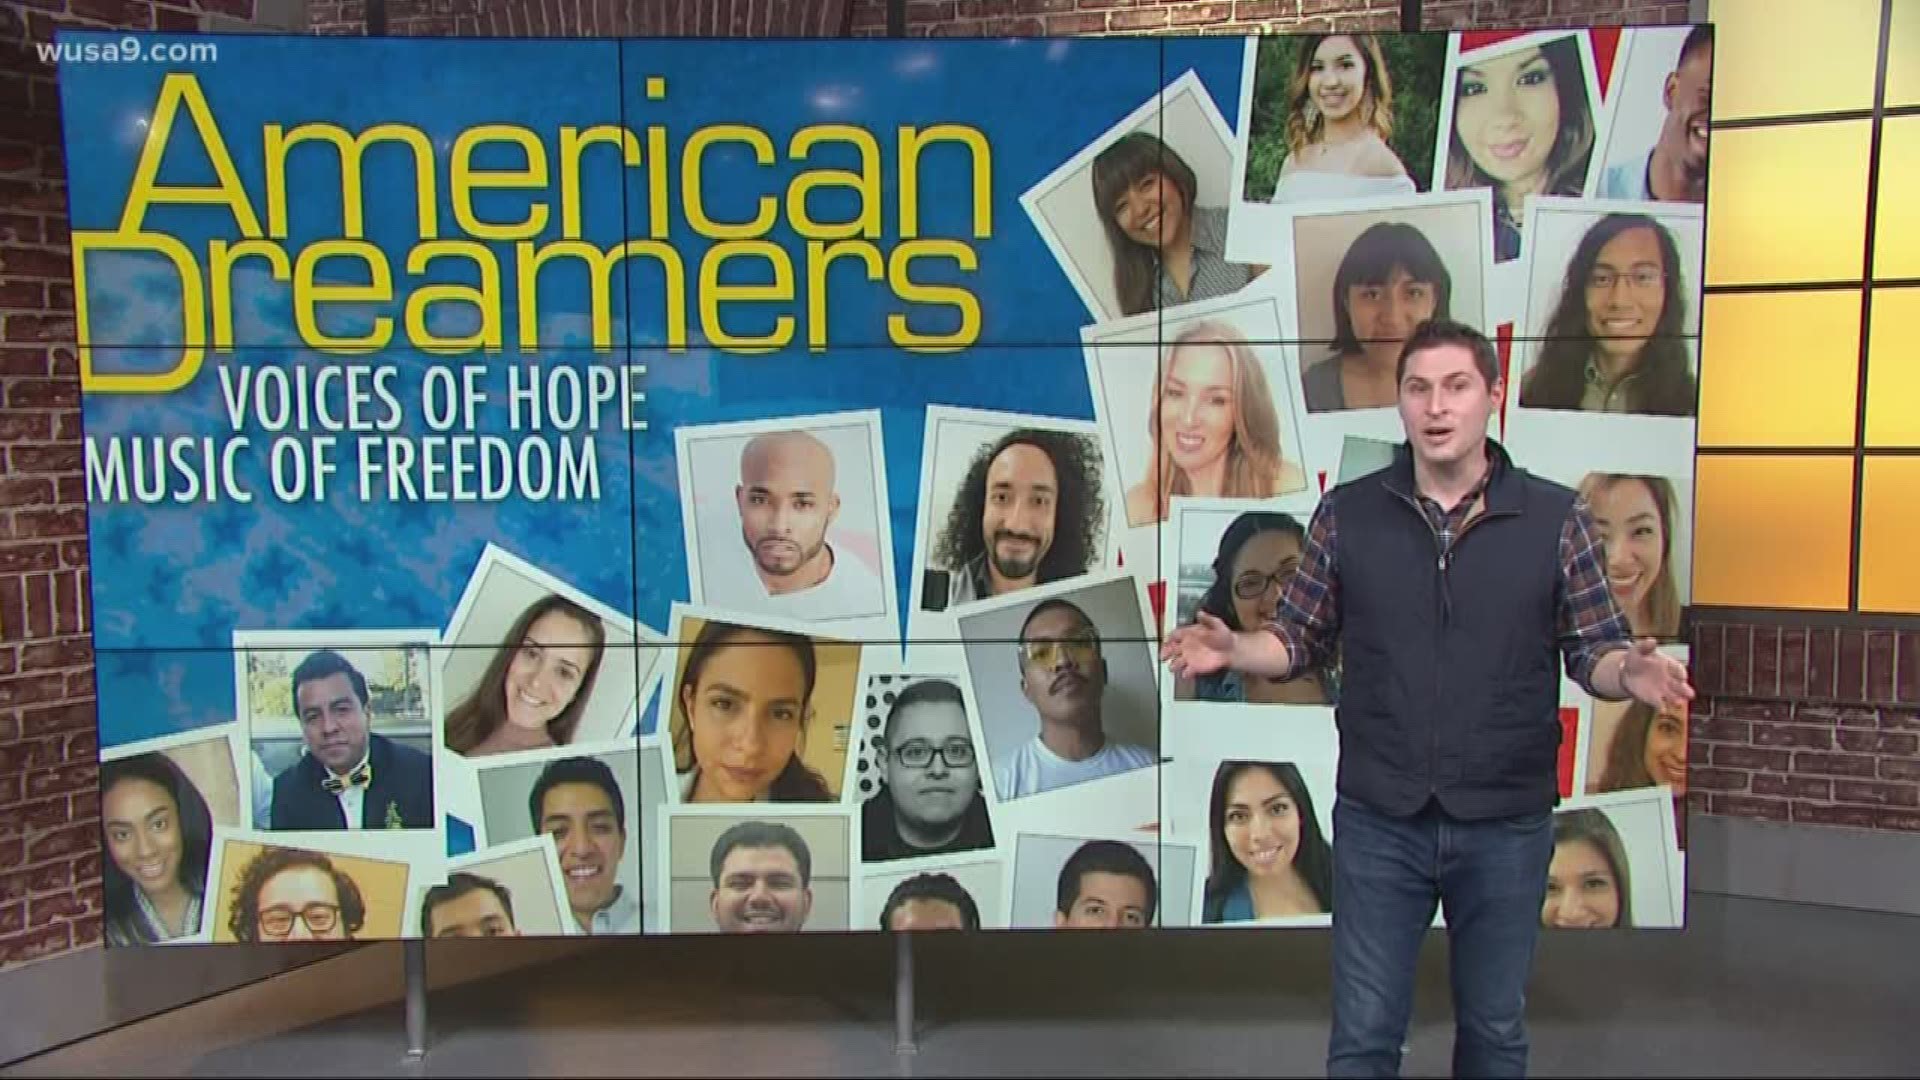 It's called American Dreamers -- voices of hope Music of Freedom.